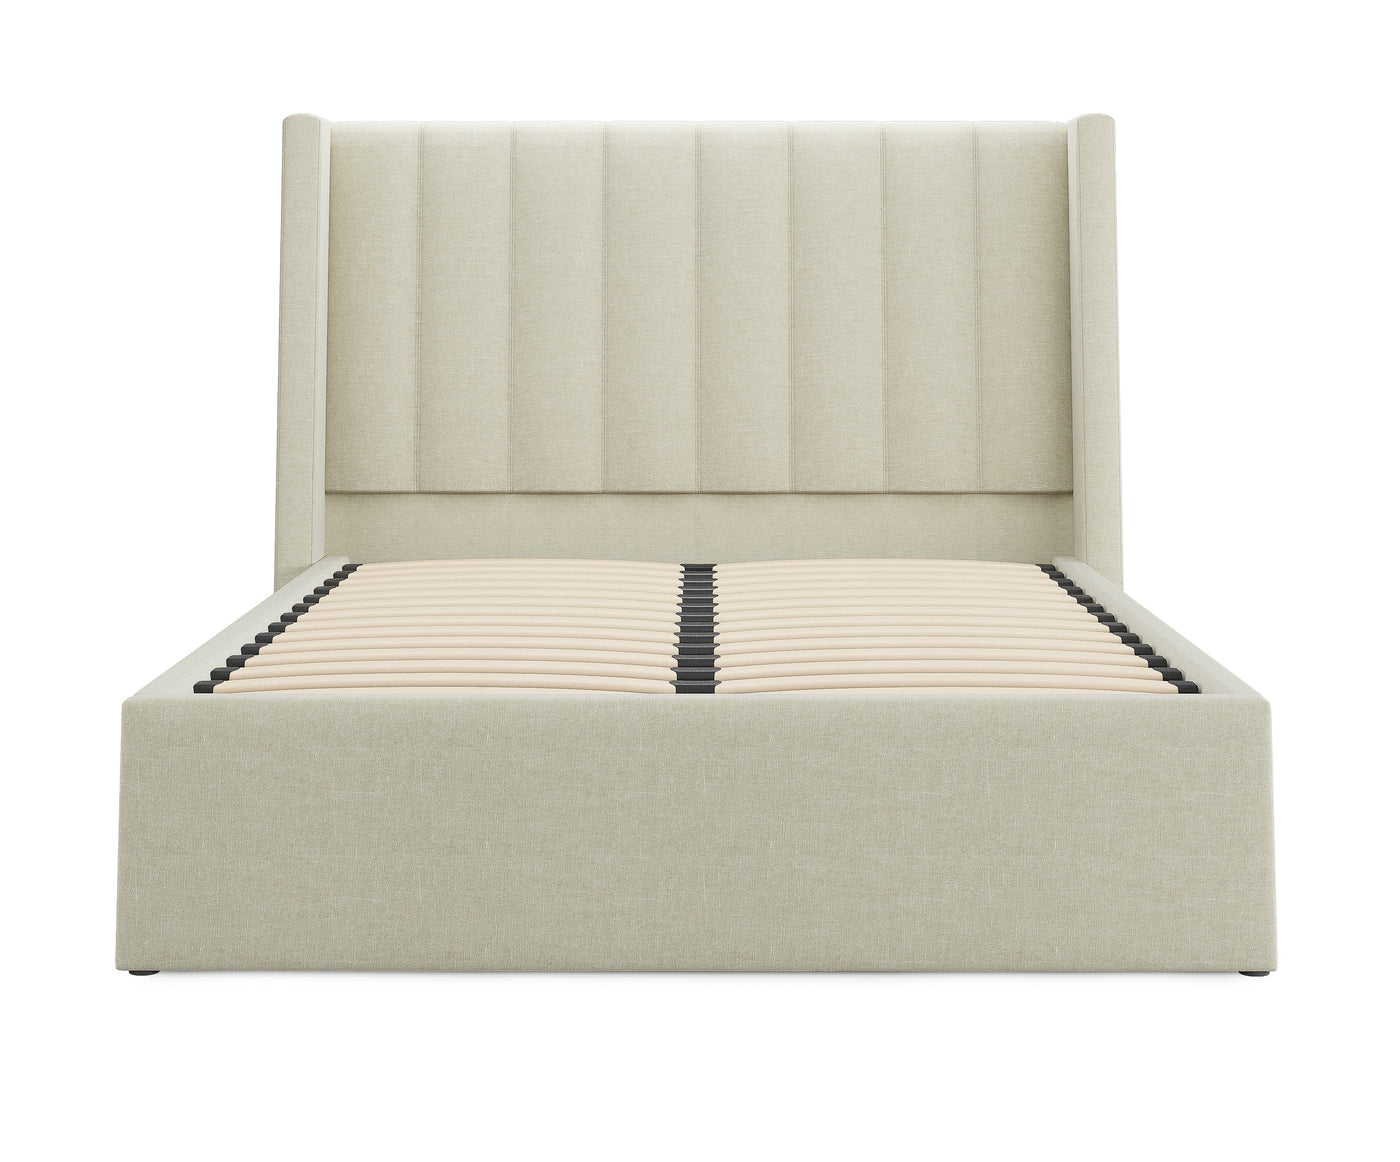 Bentleigh Gas Lift Storage Bed Frame (Stone Beige Linen Fabric) and Windsor Latex Pocket Spring Mattress Combo Deal (7841918157054)